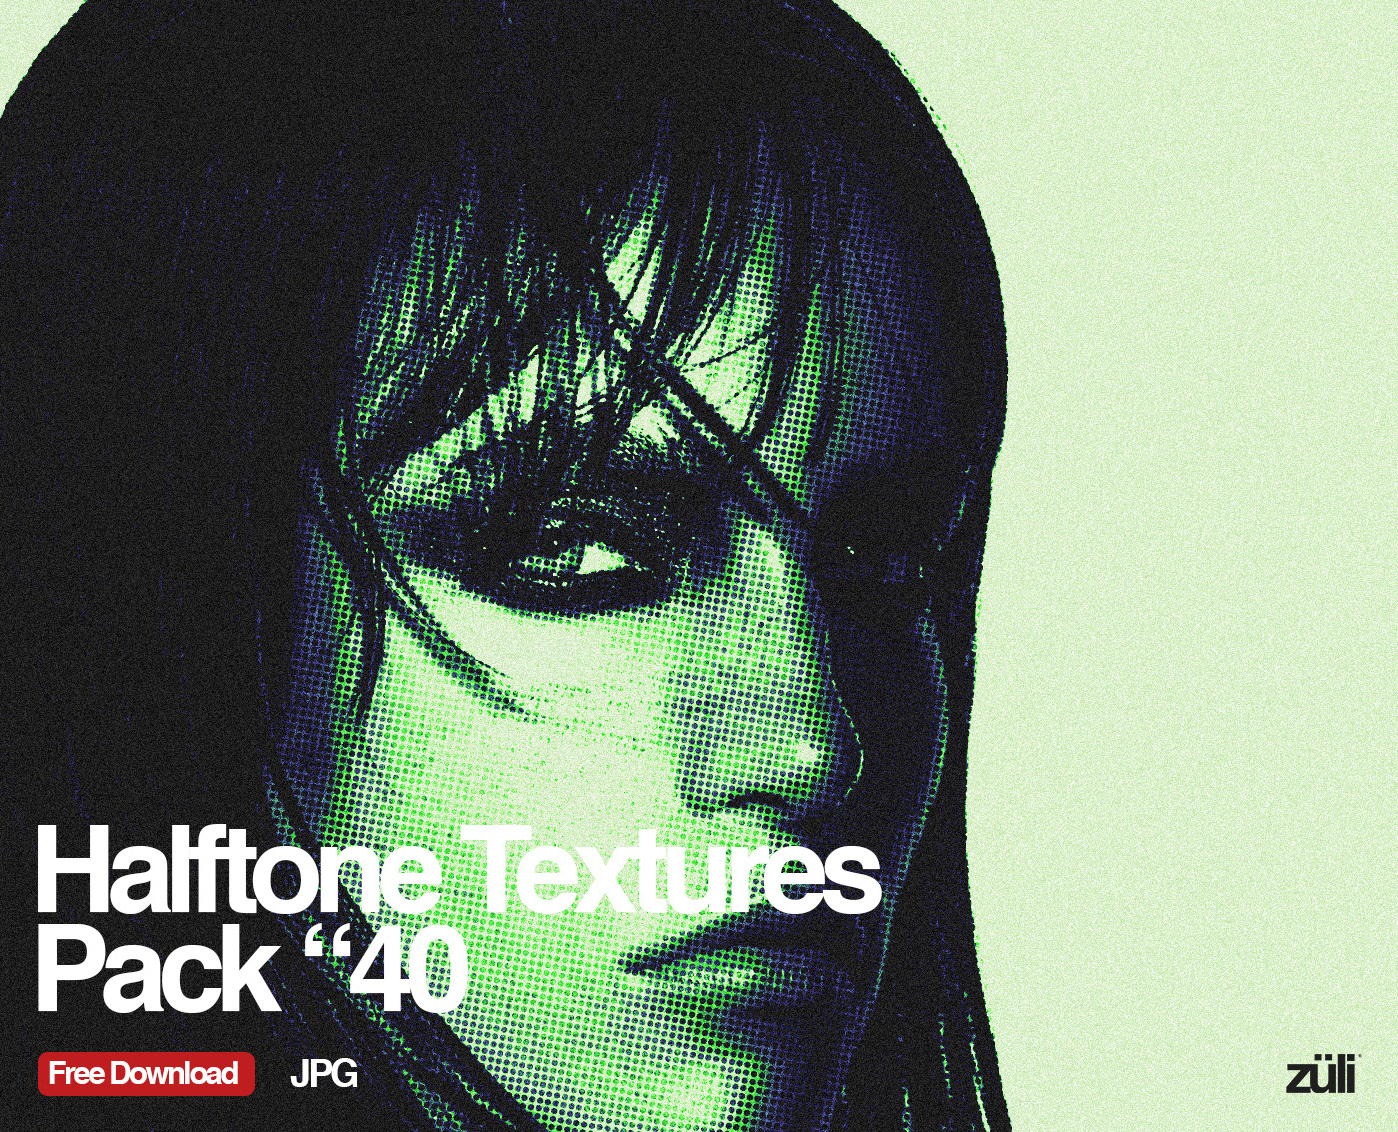 A pack of 40 free halftone textures that can be used to create backgrounds, overlays, and patterns.